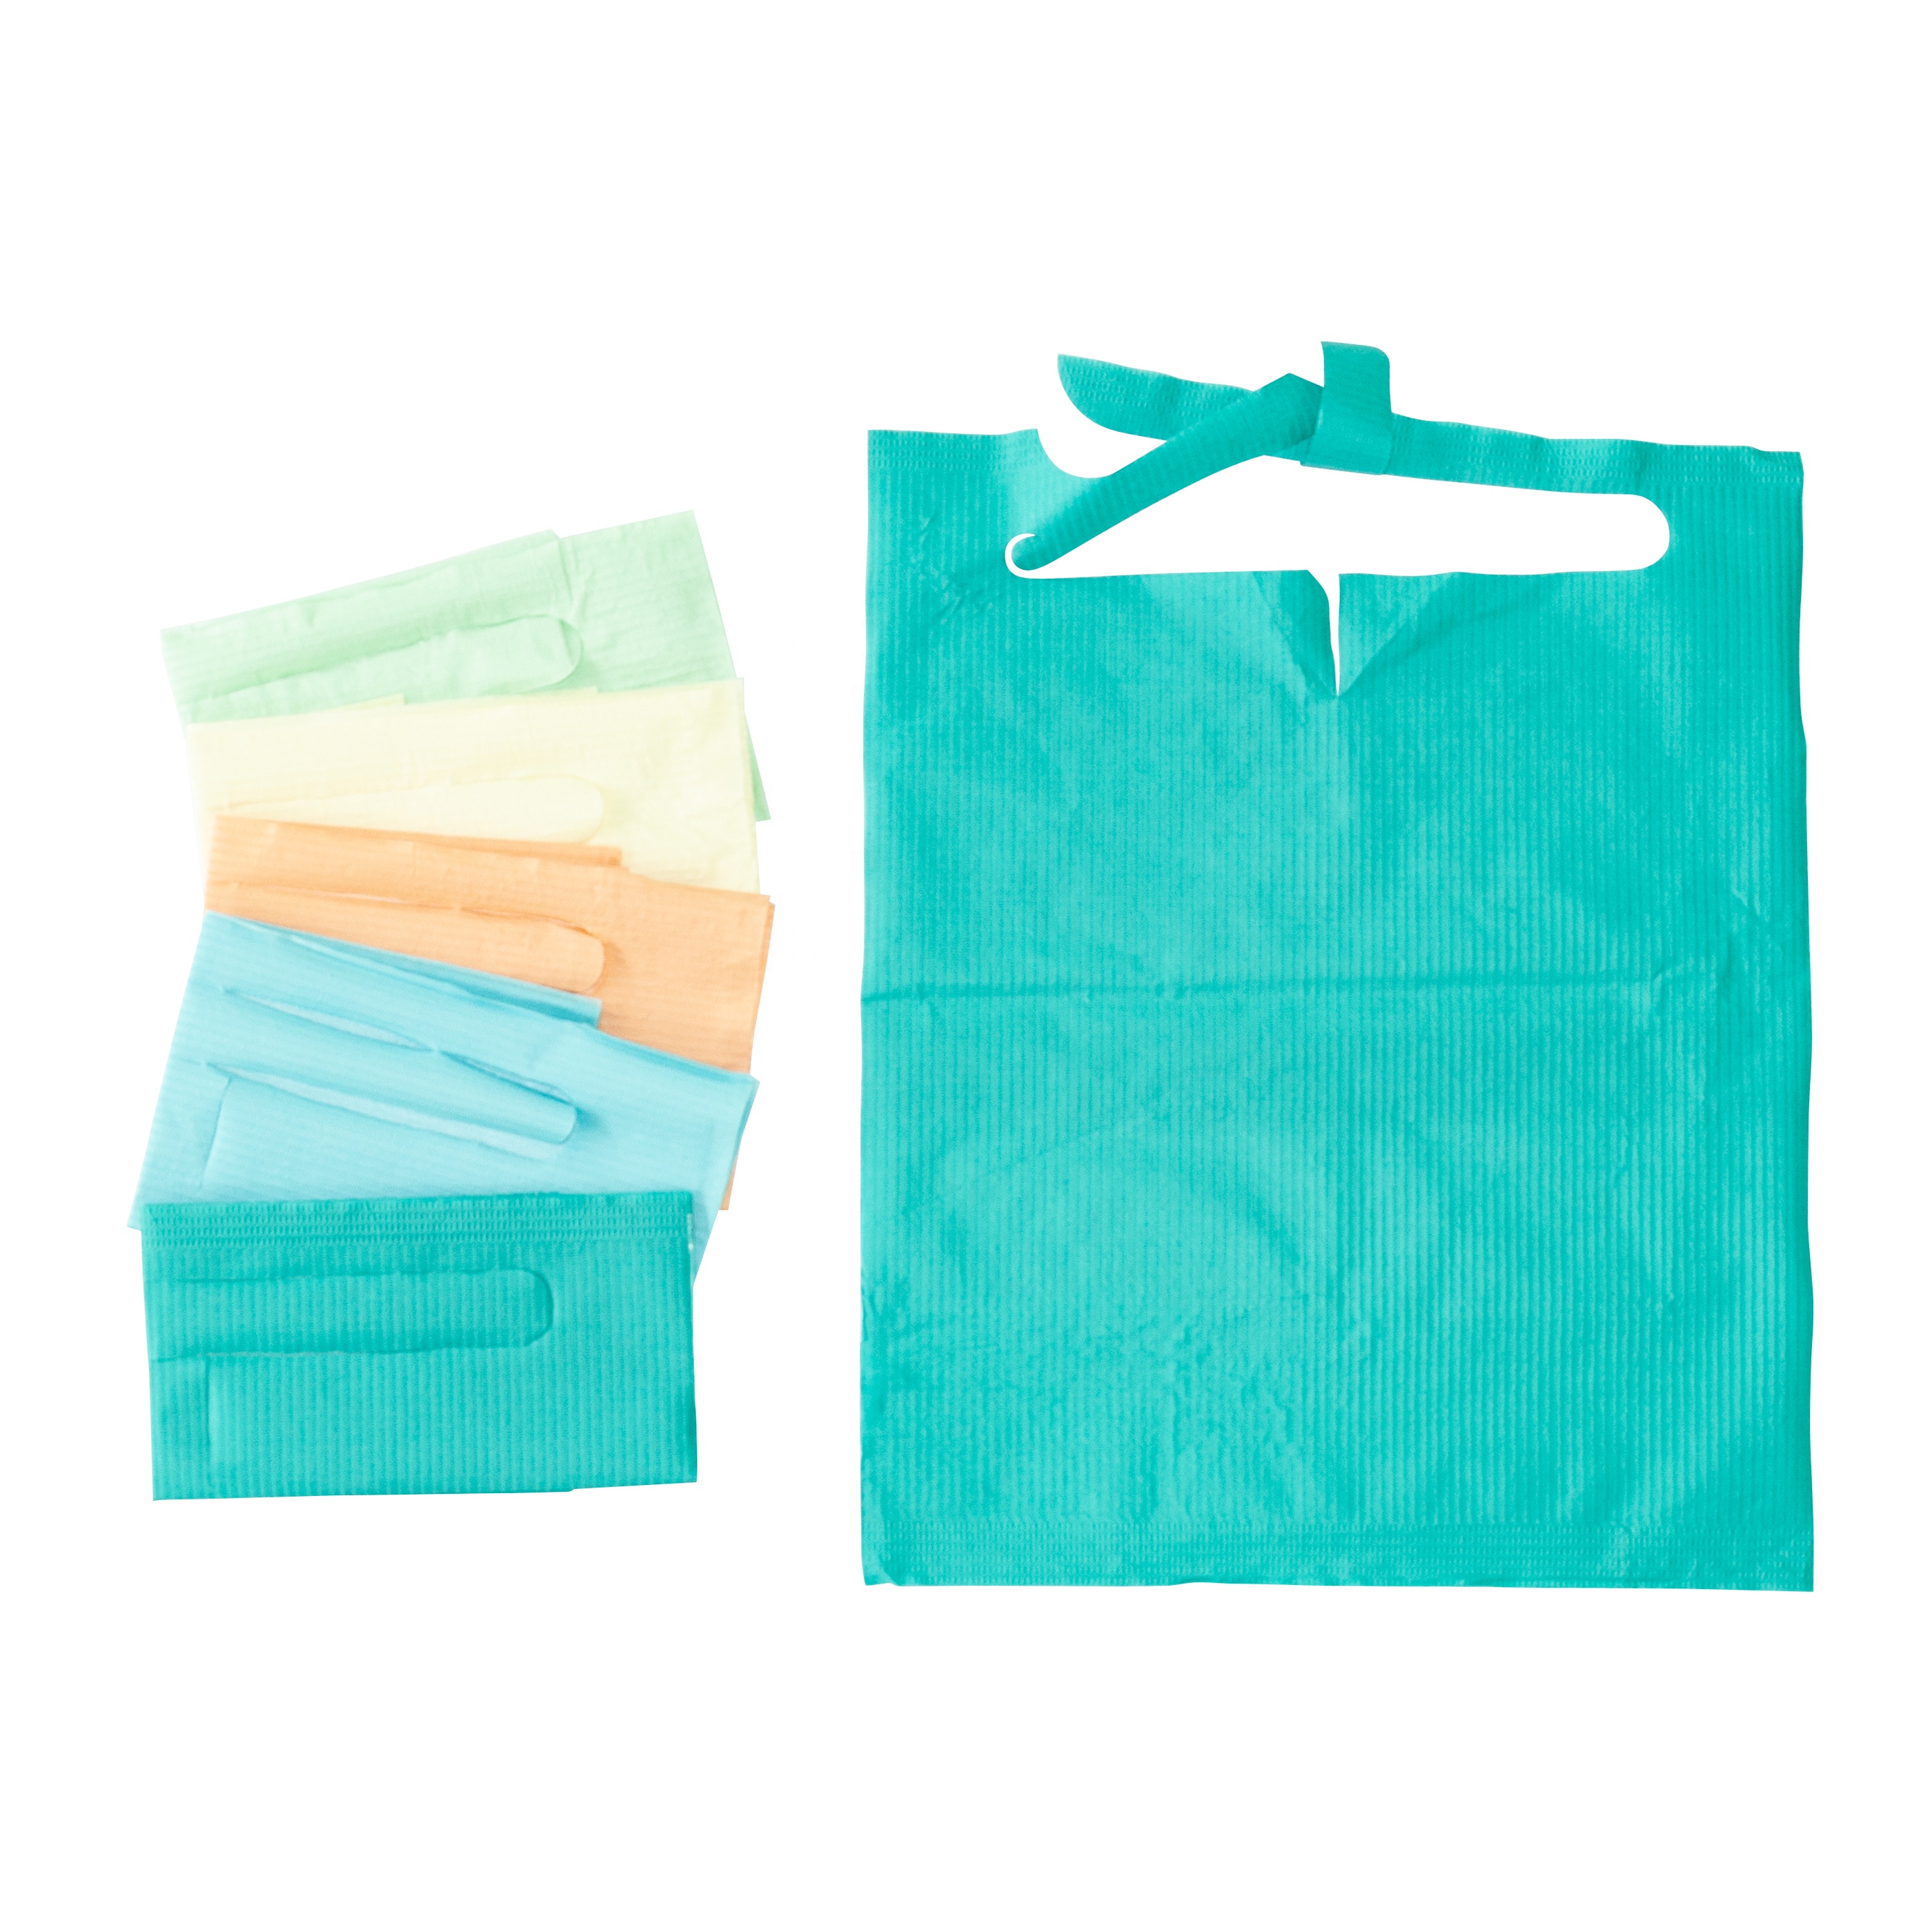 How do disposable dental bibs contribute to infection control in dental offices?